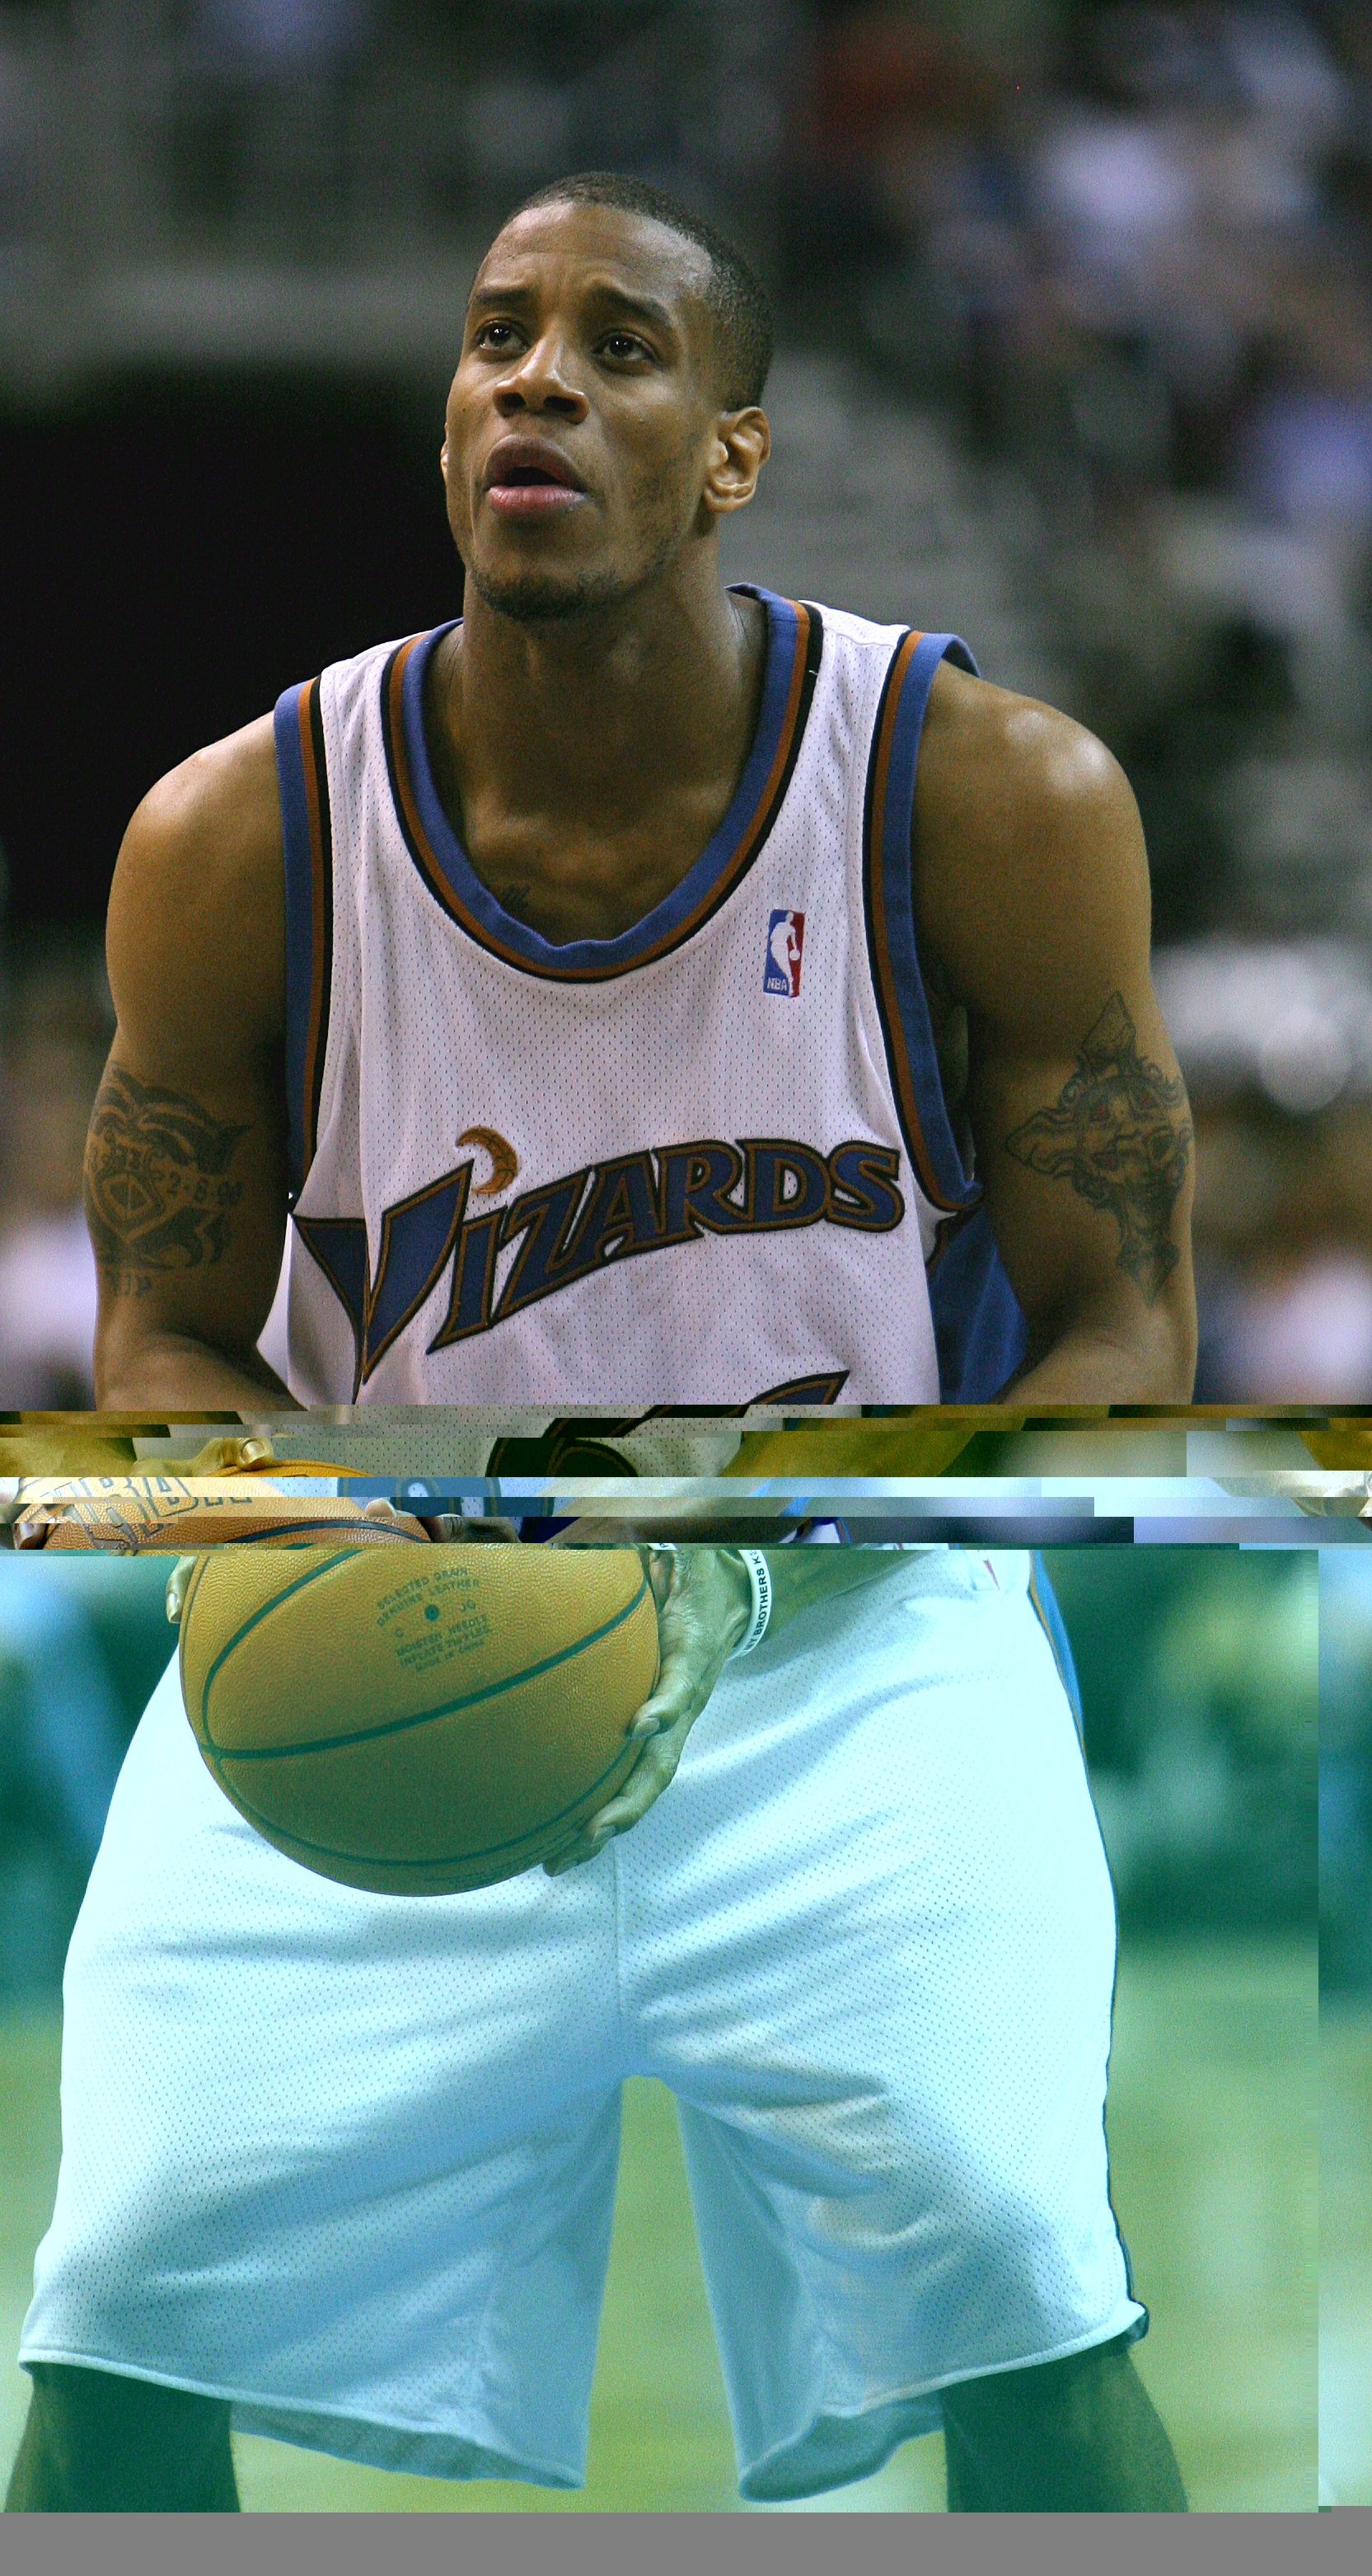 Category:Players who wear/wore number 17 | Basketball Wiki | FANDOM powered by Wikia1665 x 3125